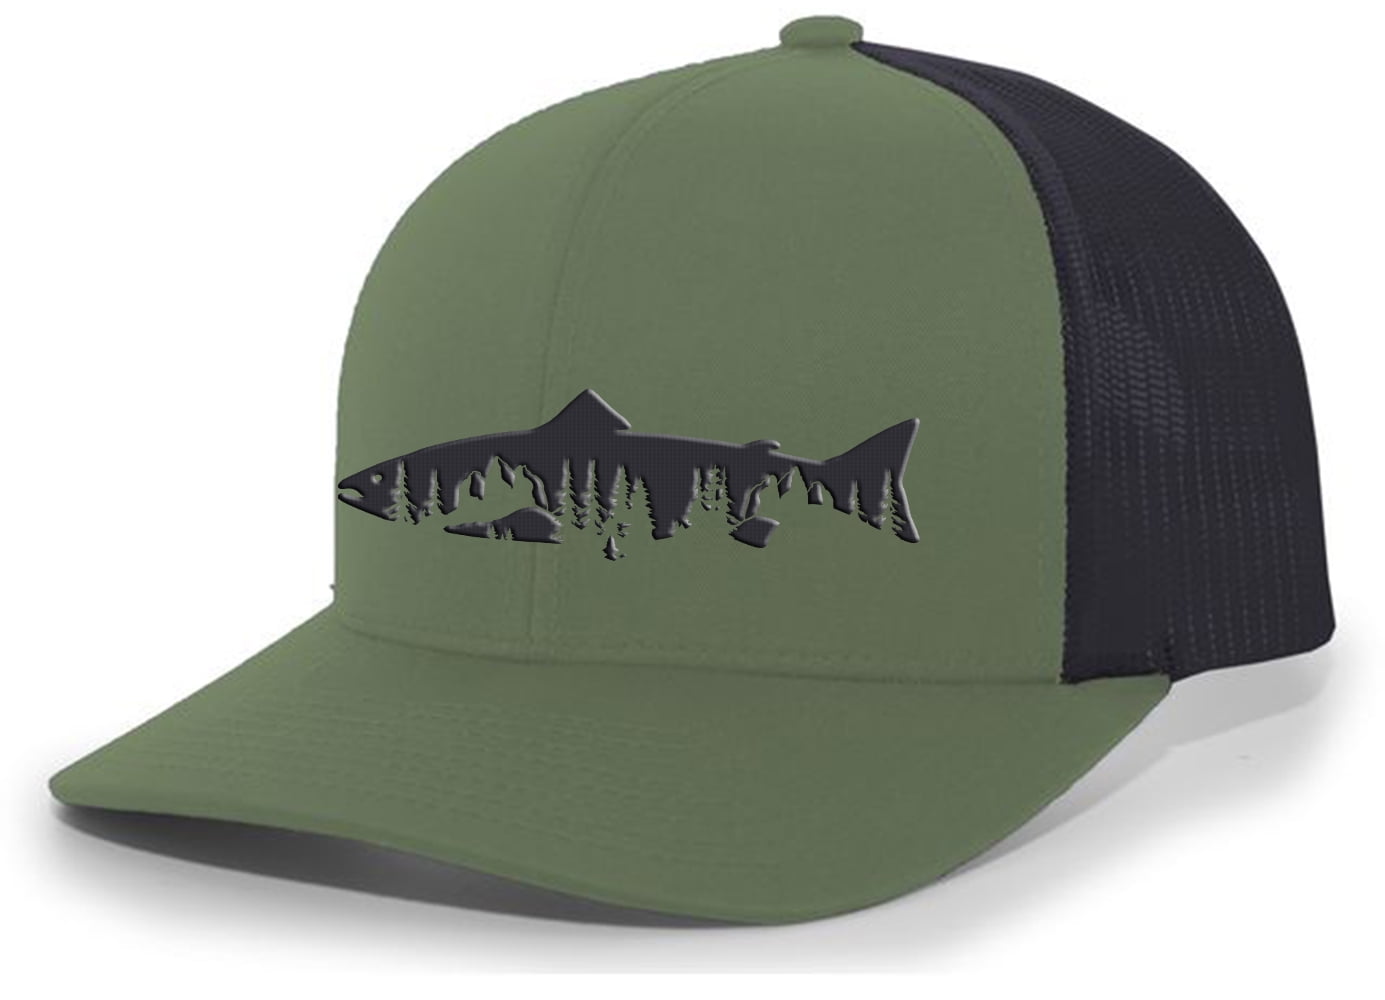 Heritage Pride Freshwater Fish Forest Mountain scenic Salmon Mens Embroidered Mesh Back Trucker Hat, Loden/Black